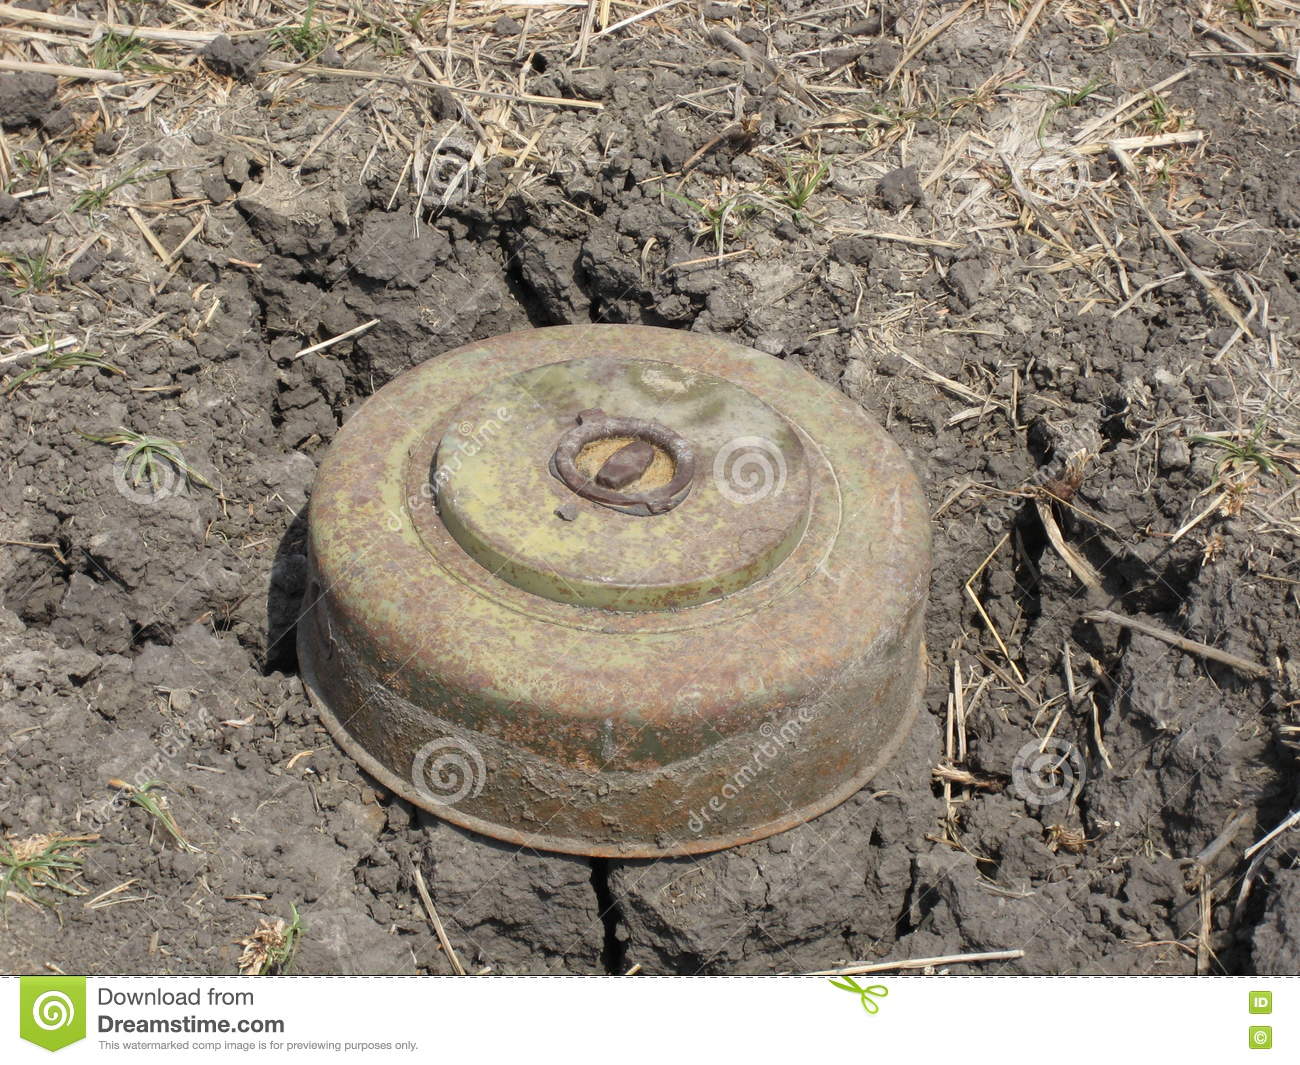 UNMAS cautions Piji County residents against existing landmines